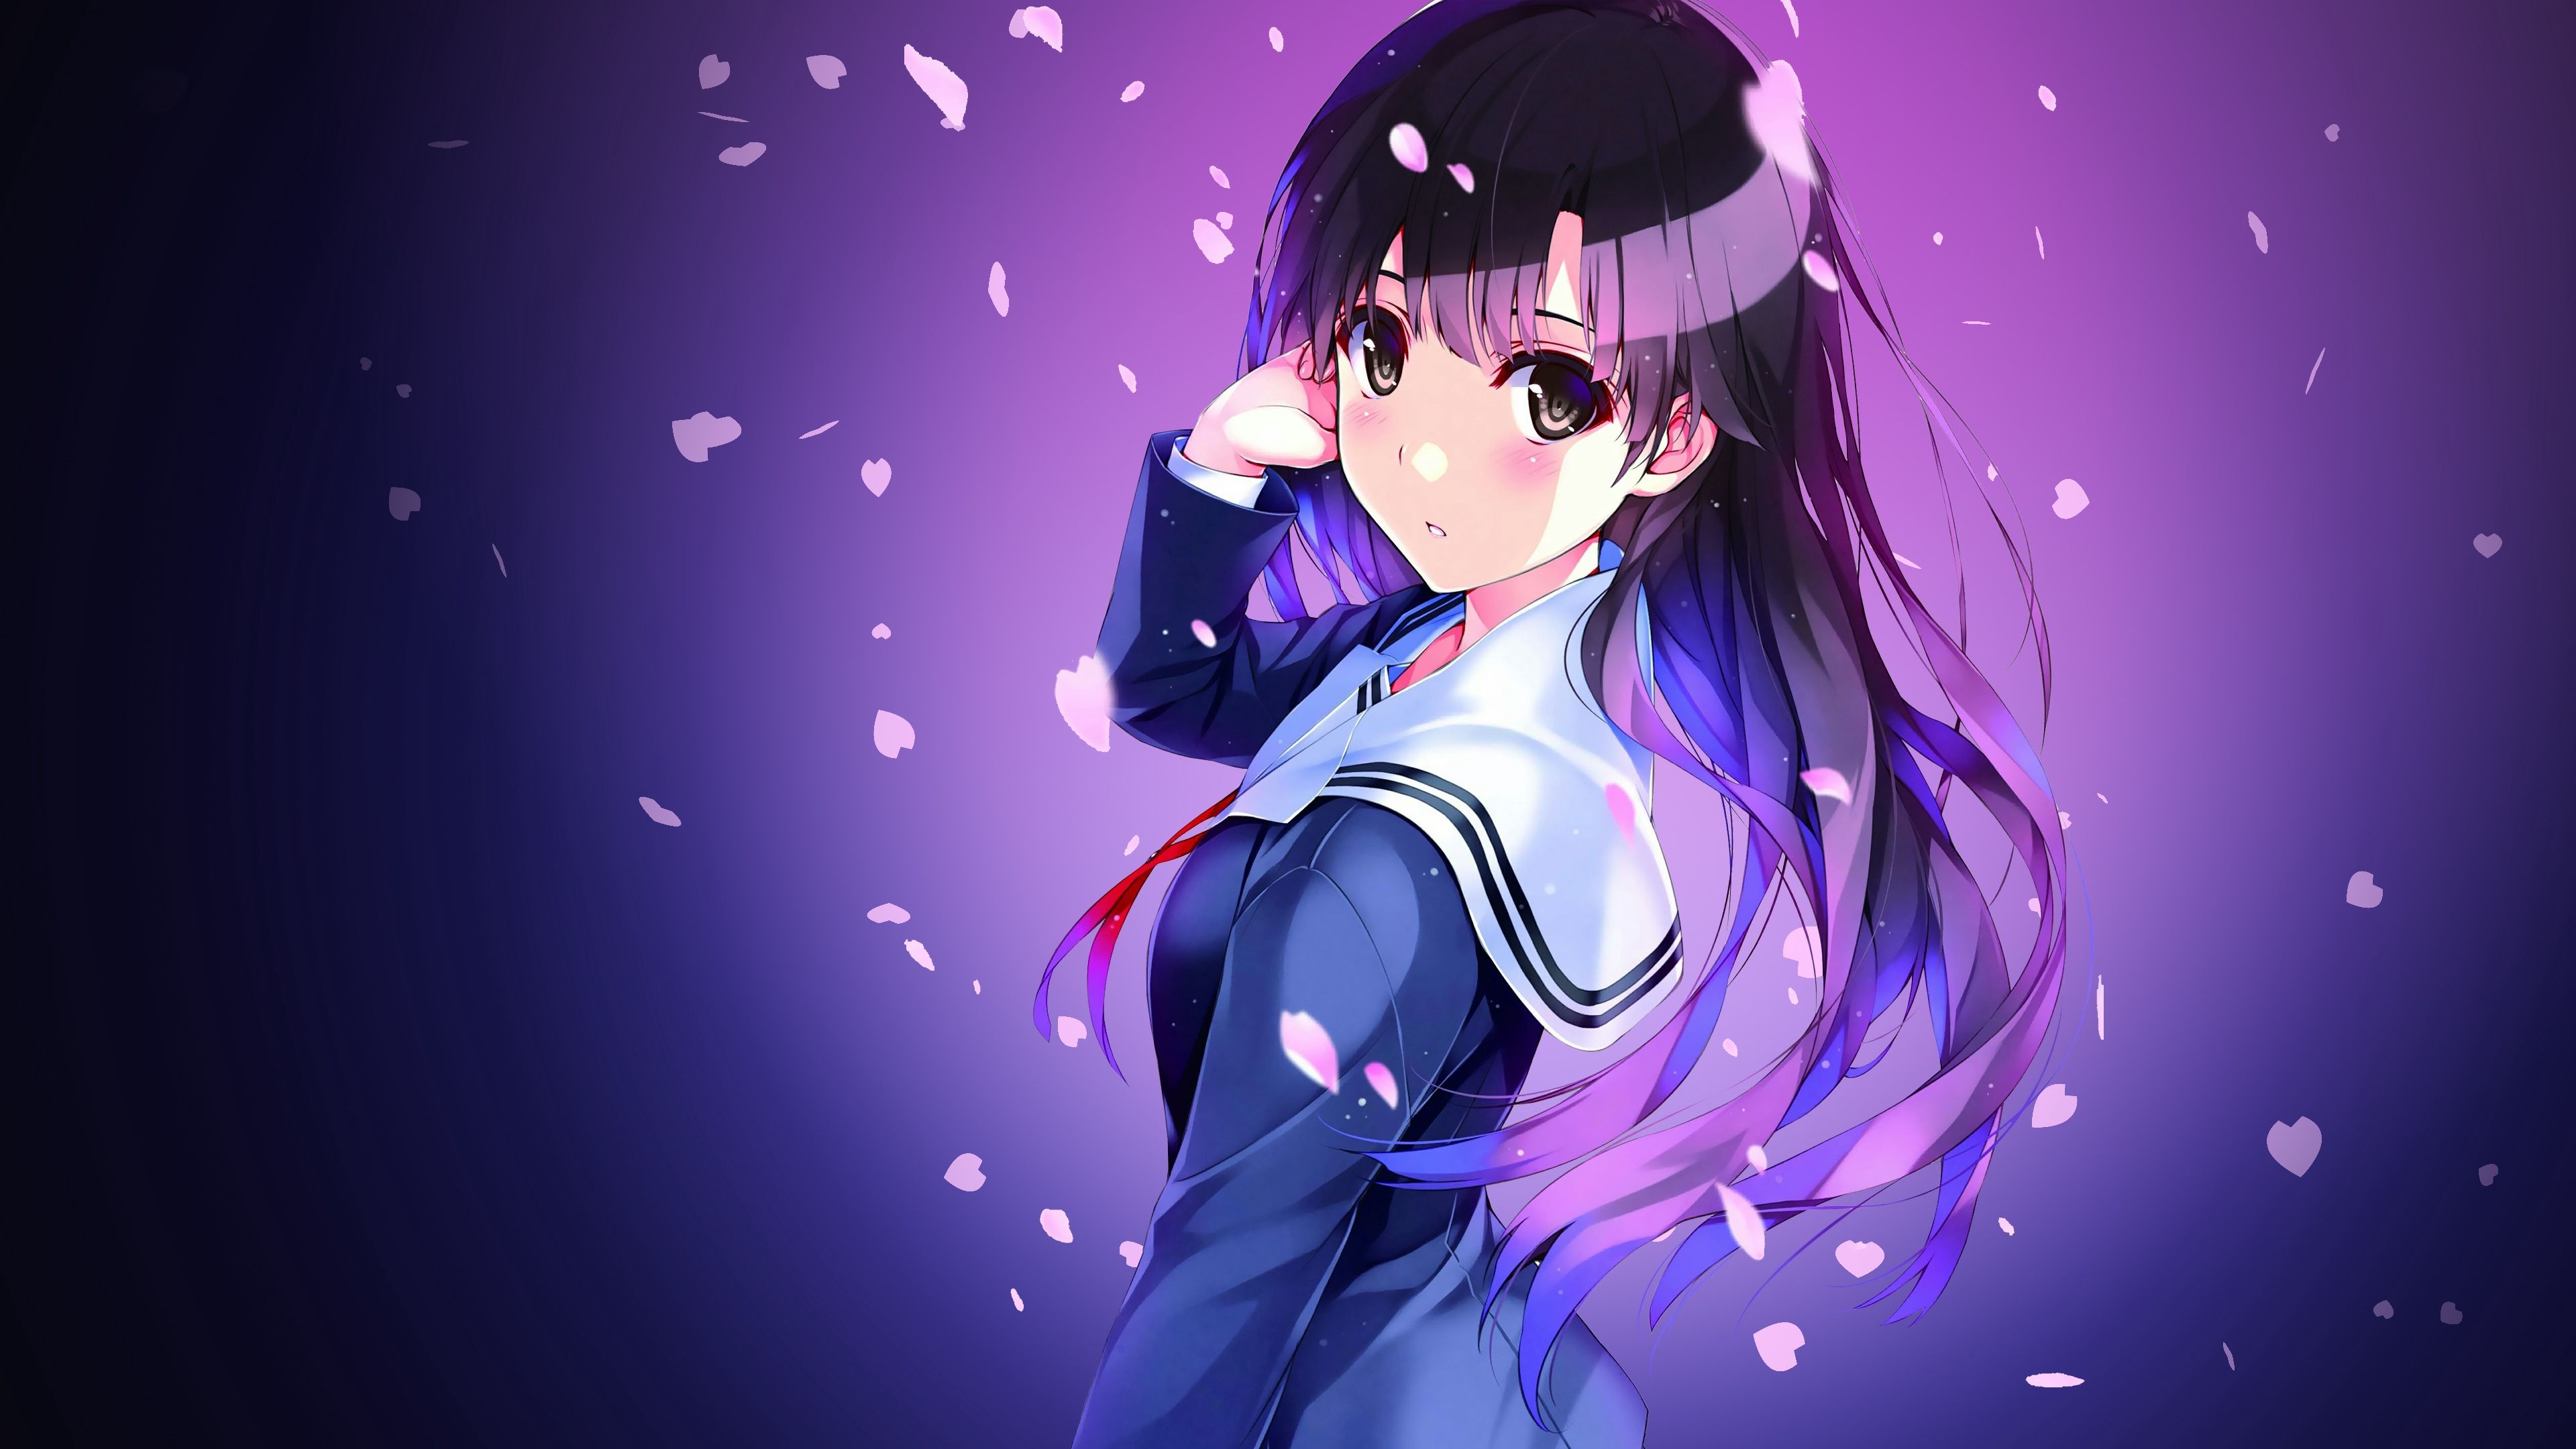 Anime Girl With Bubble Uniform On Steps 4K HD Anime Girl Wallpapers, HD  Wallpapers